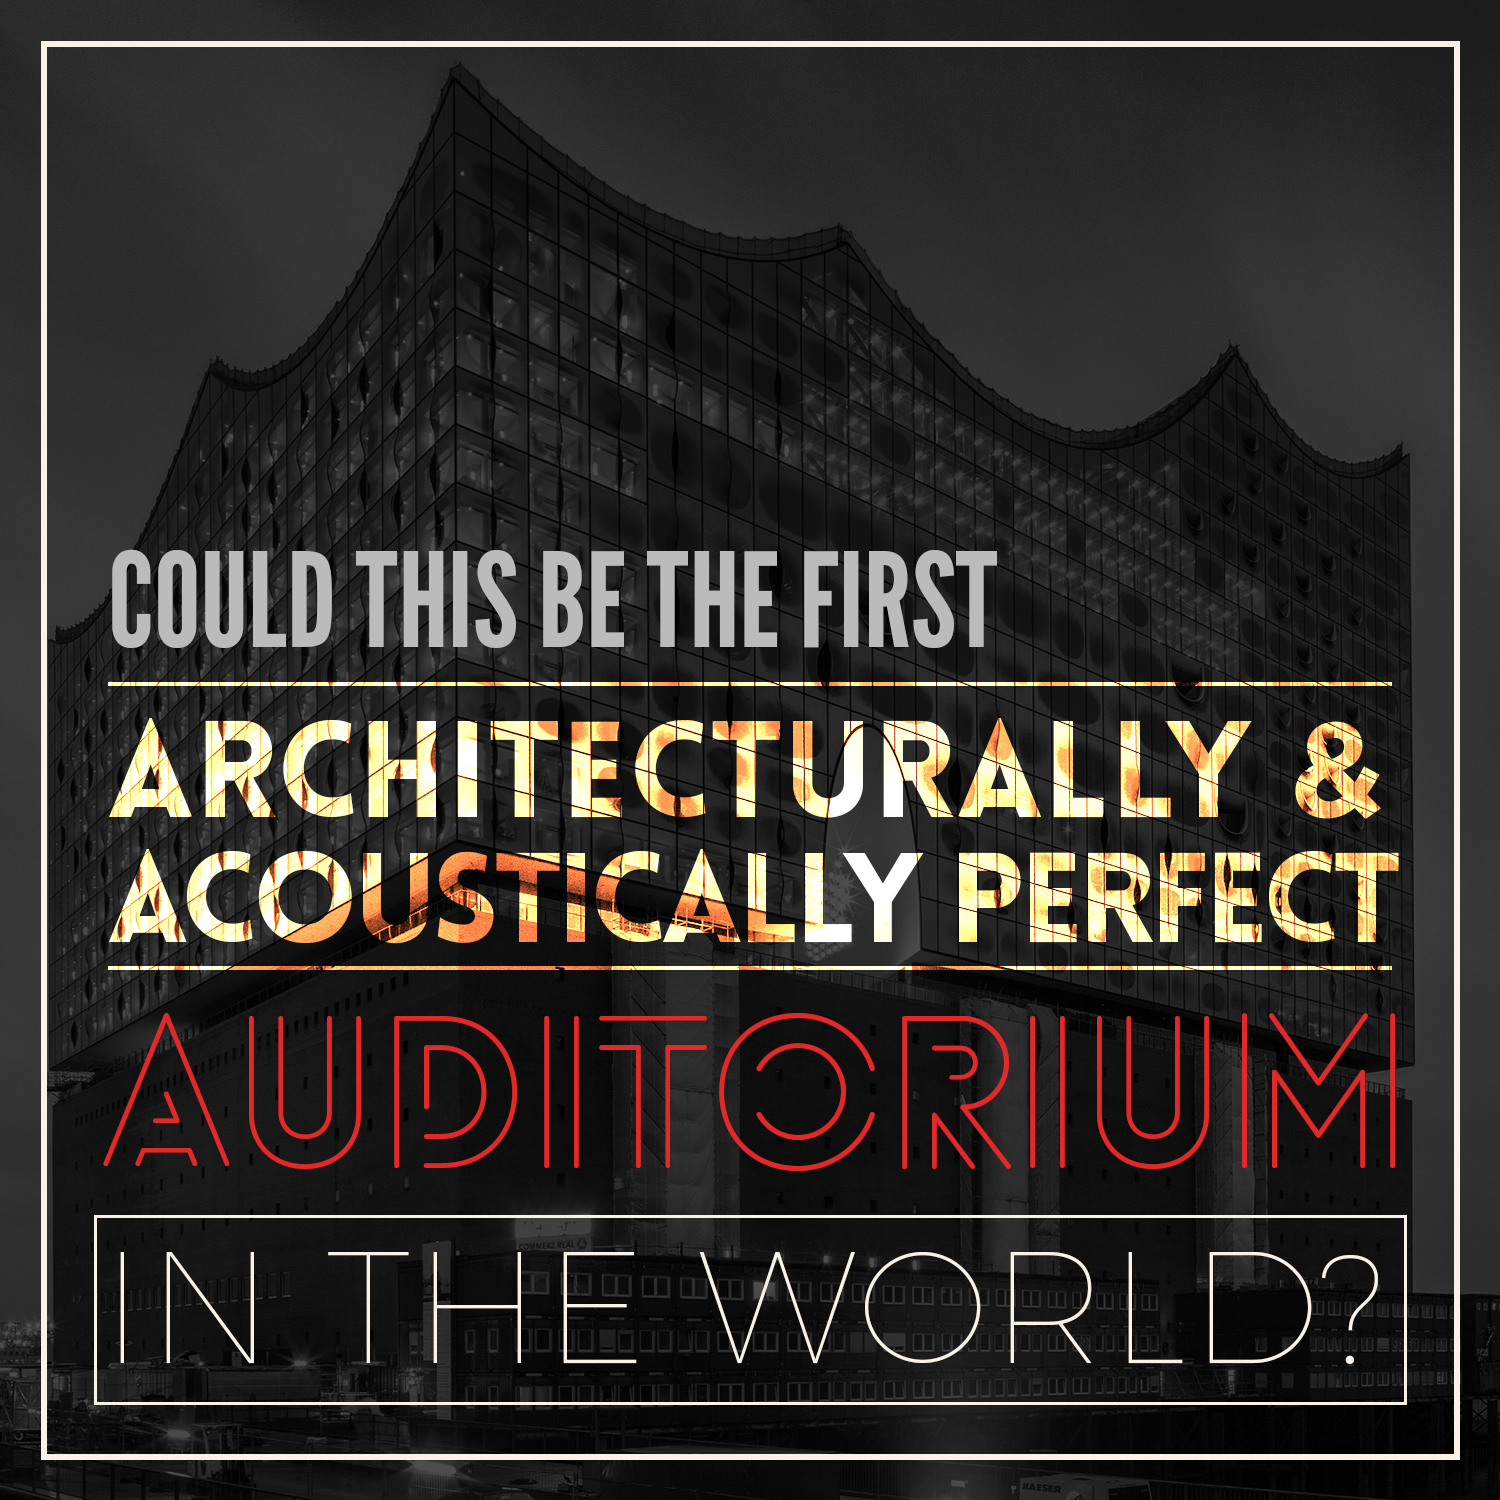 Could this be the First “Architecturally and Acoustically Perfect” Auditorium in the World